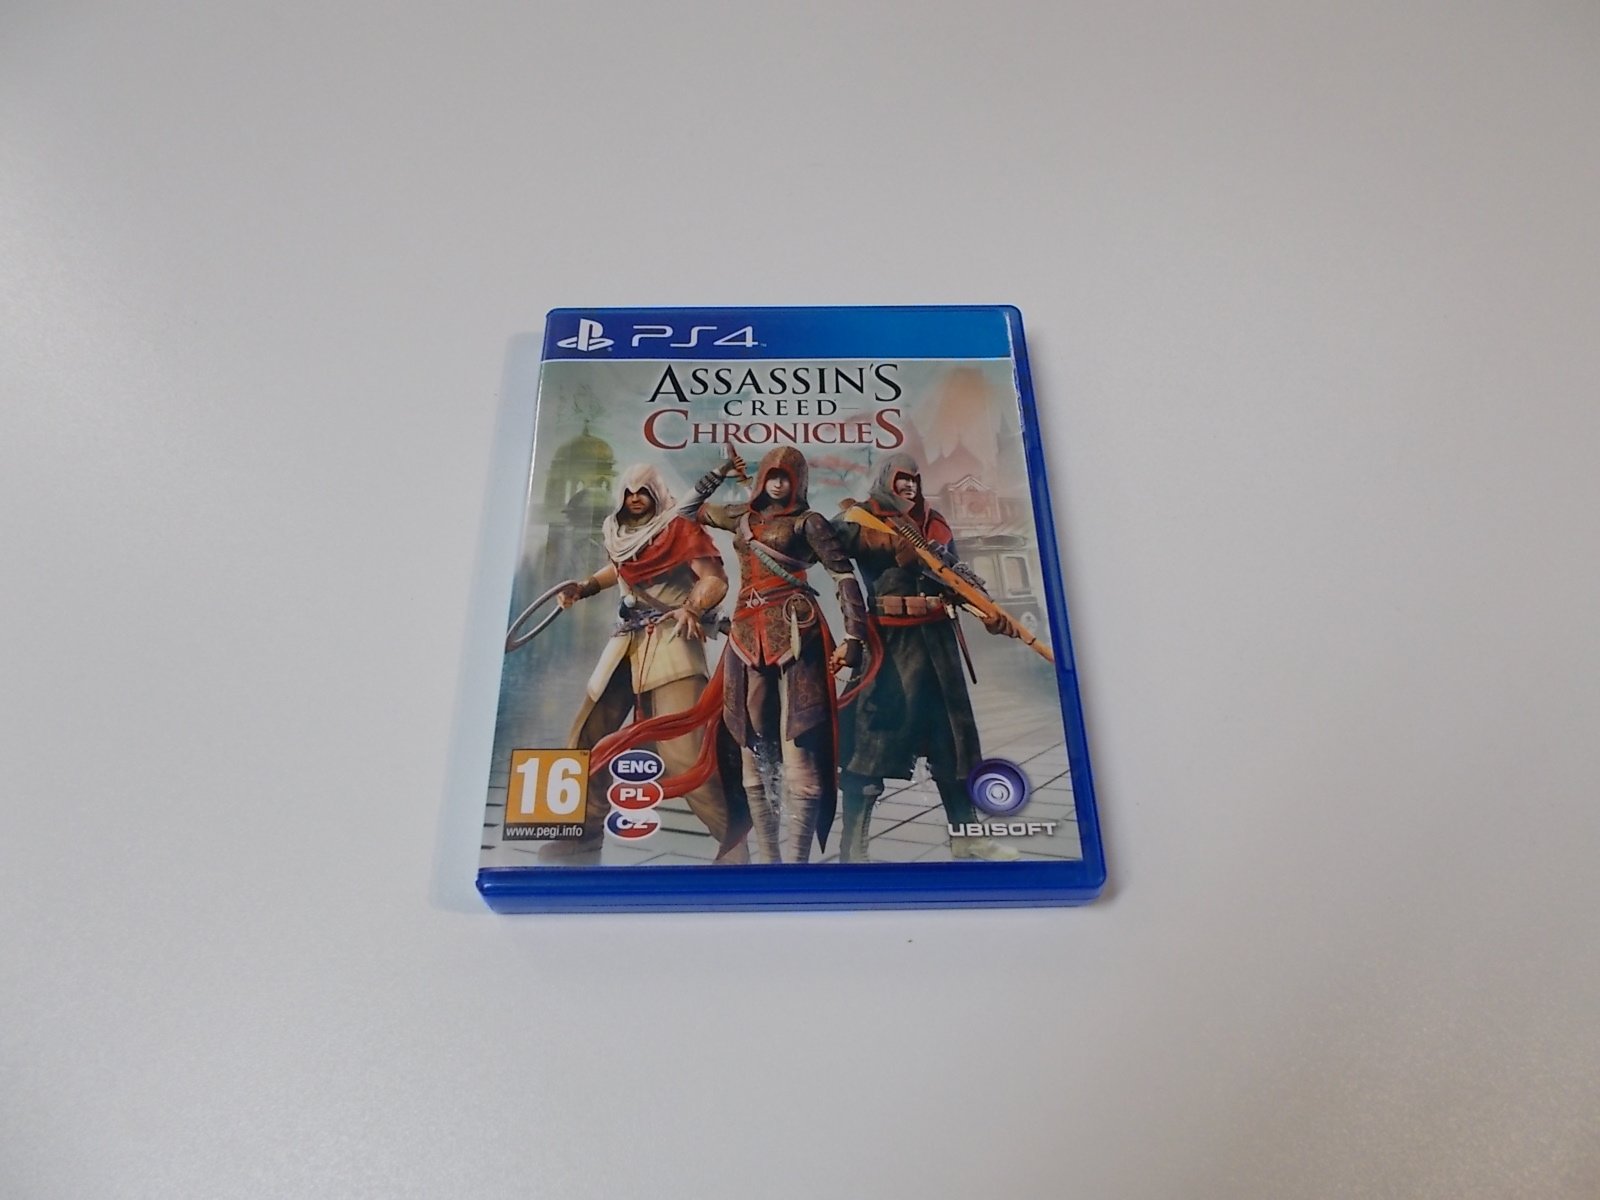 Assassins Creed Chronicles - GRA Ps4 - Opole 0491